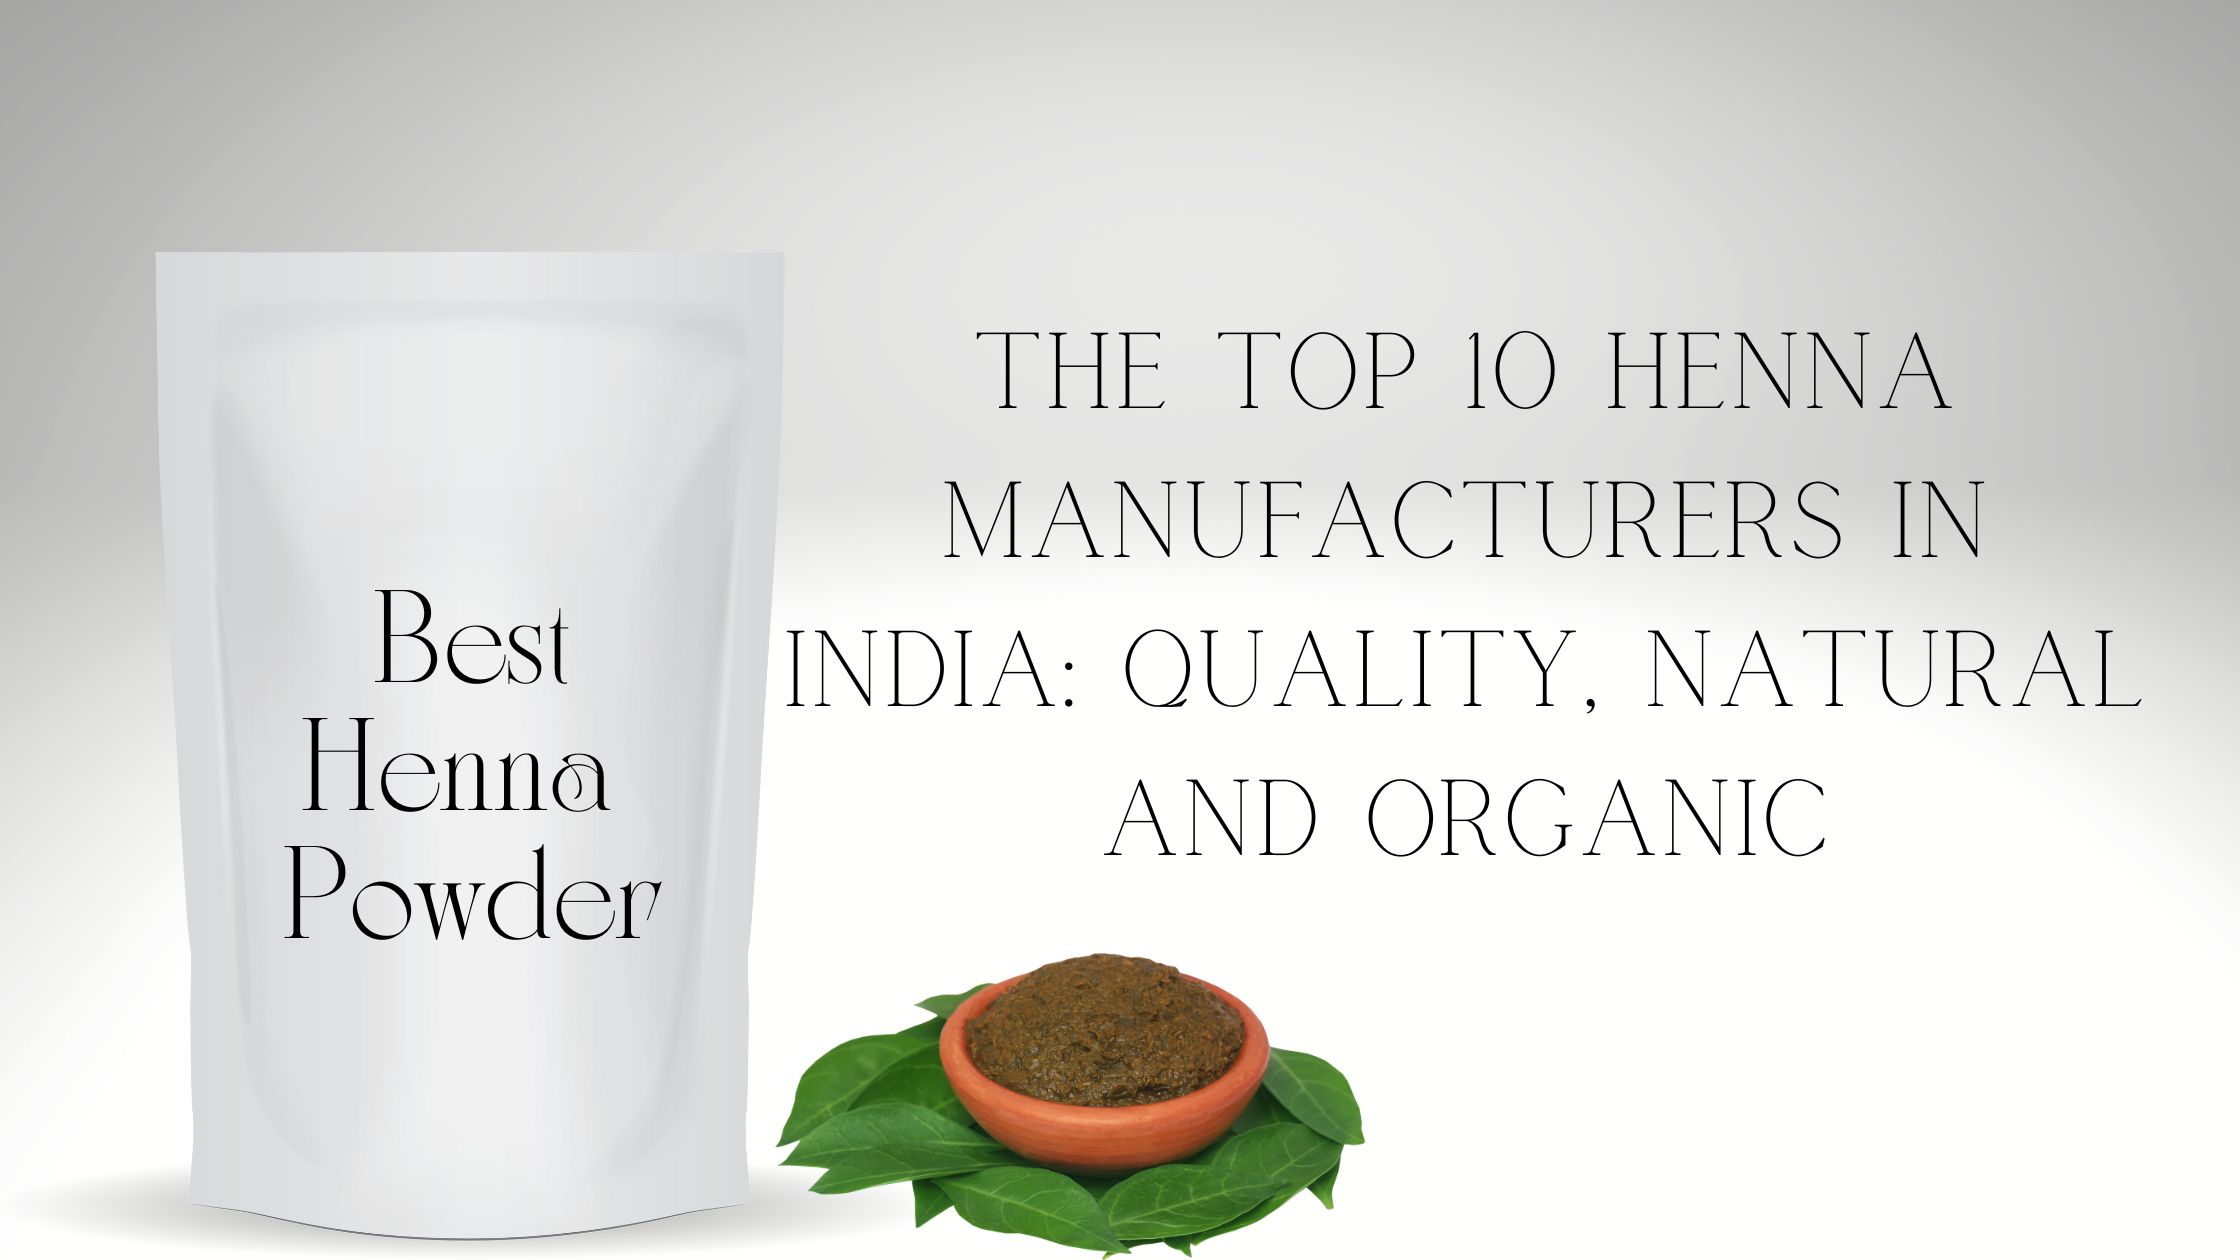 The Top 10 Henna Manufacturers in India